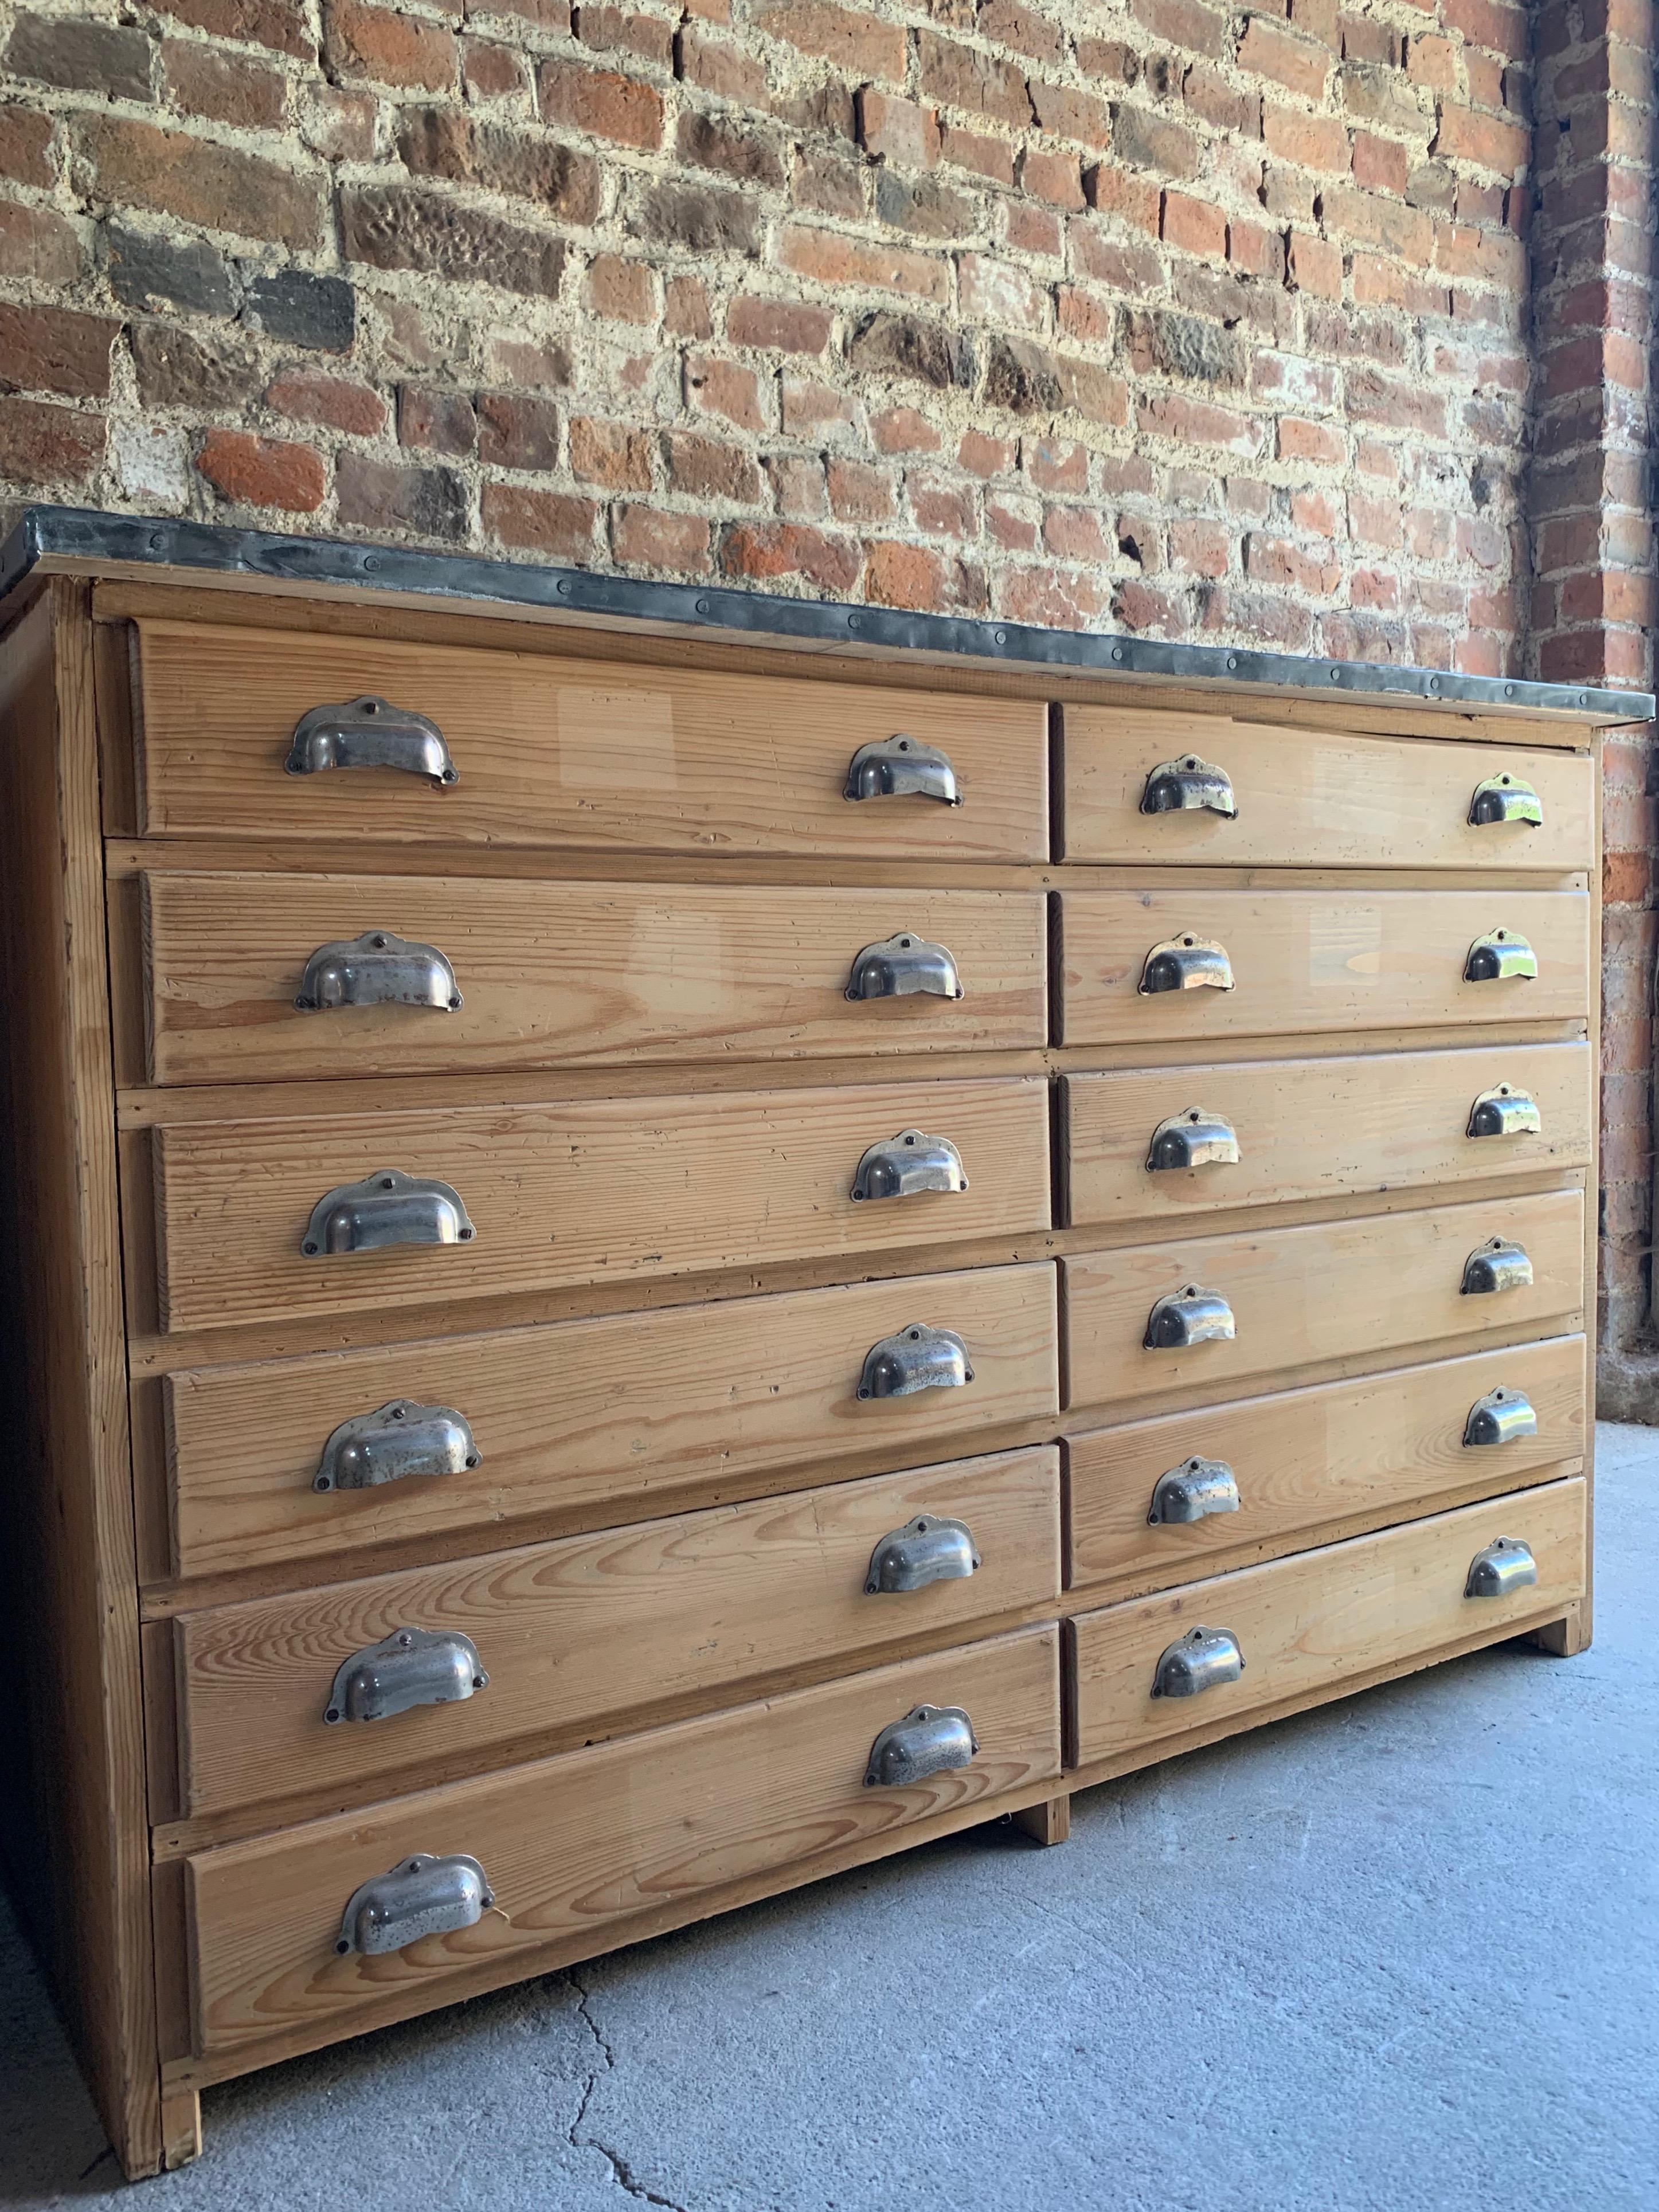 Victorian Zinc Top Engineers Industrial Pine Chest of Drawers / Sideboard Circa 1890

Magnificent Victorian Zinc topped Pine engineers industrial chest of drawers circa 1890, the rectangular zinc riveted top over twelve drawers each with original